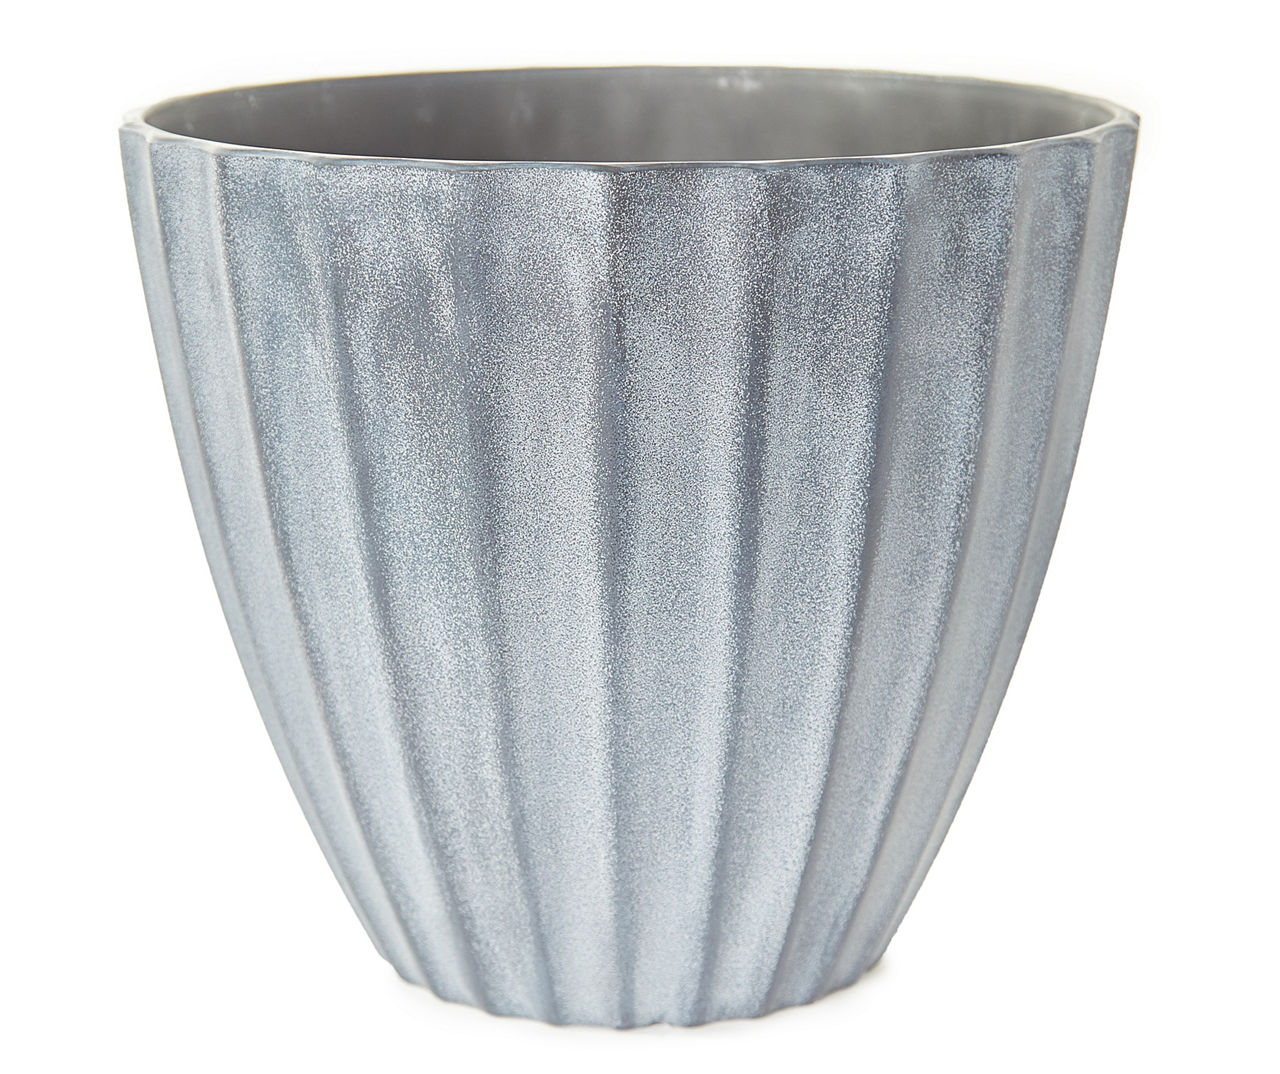 12 IN CHARCOAL FLUTED PLANTER